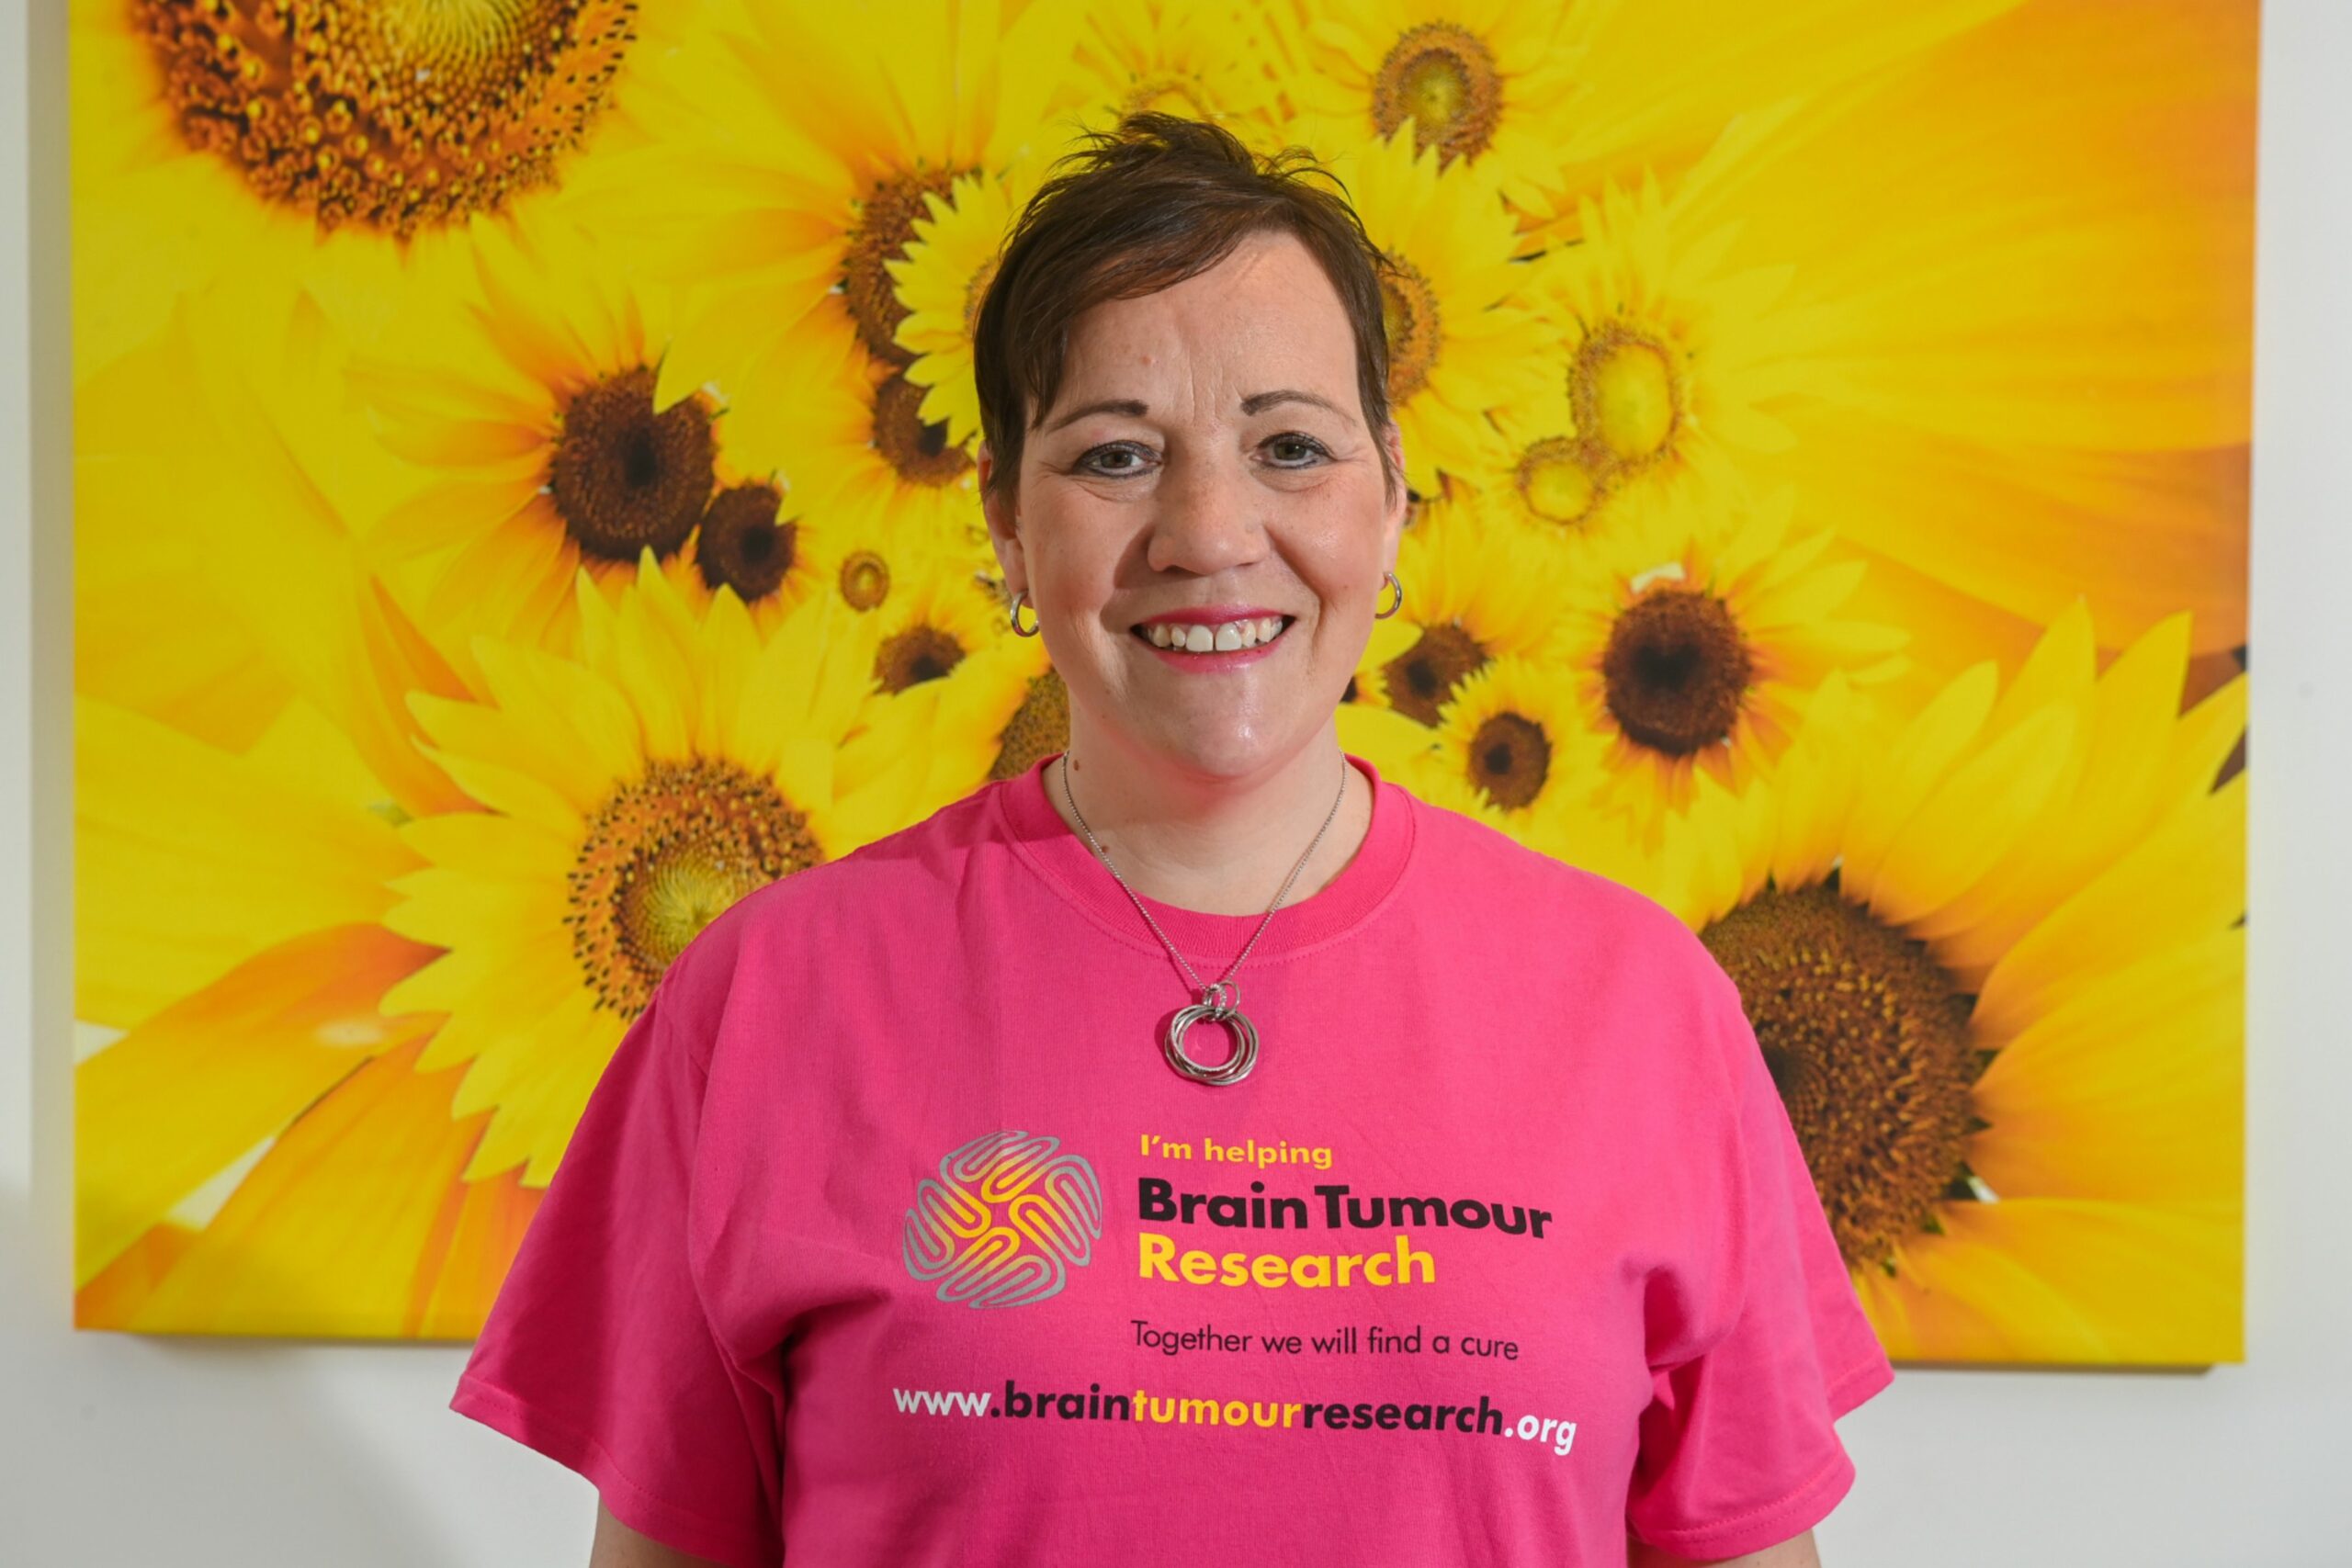 Suzanne hopes she can inspire others by sharing her story. Image: Kenny Elrick/DC Thomson